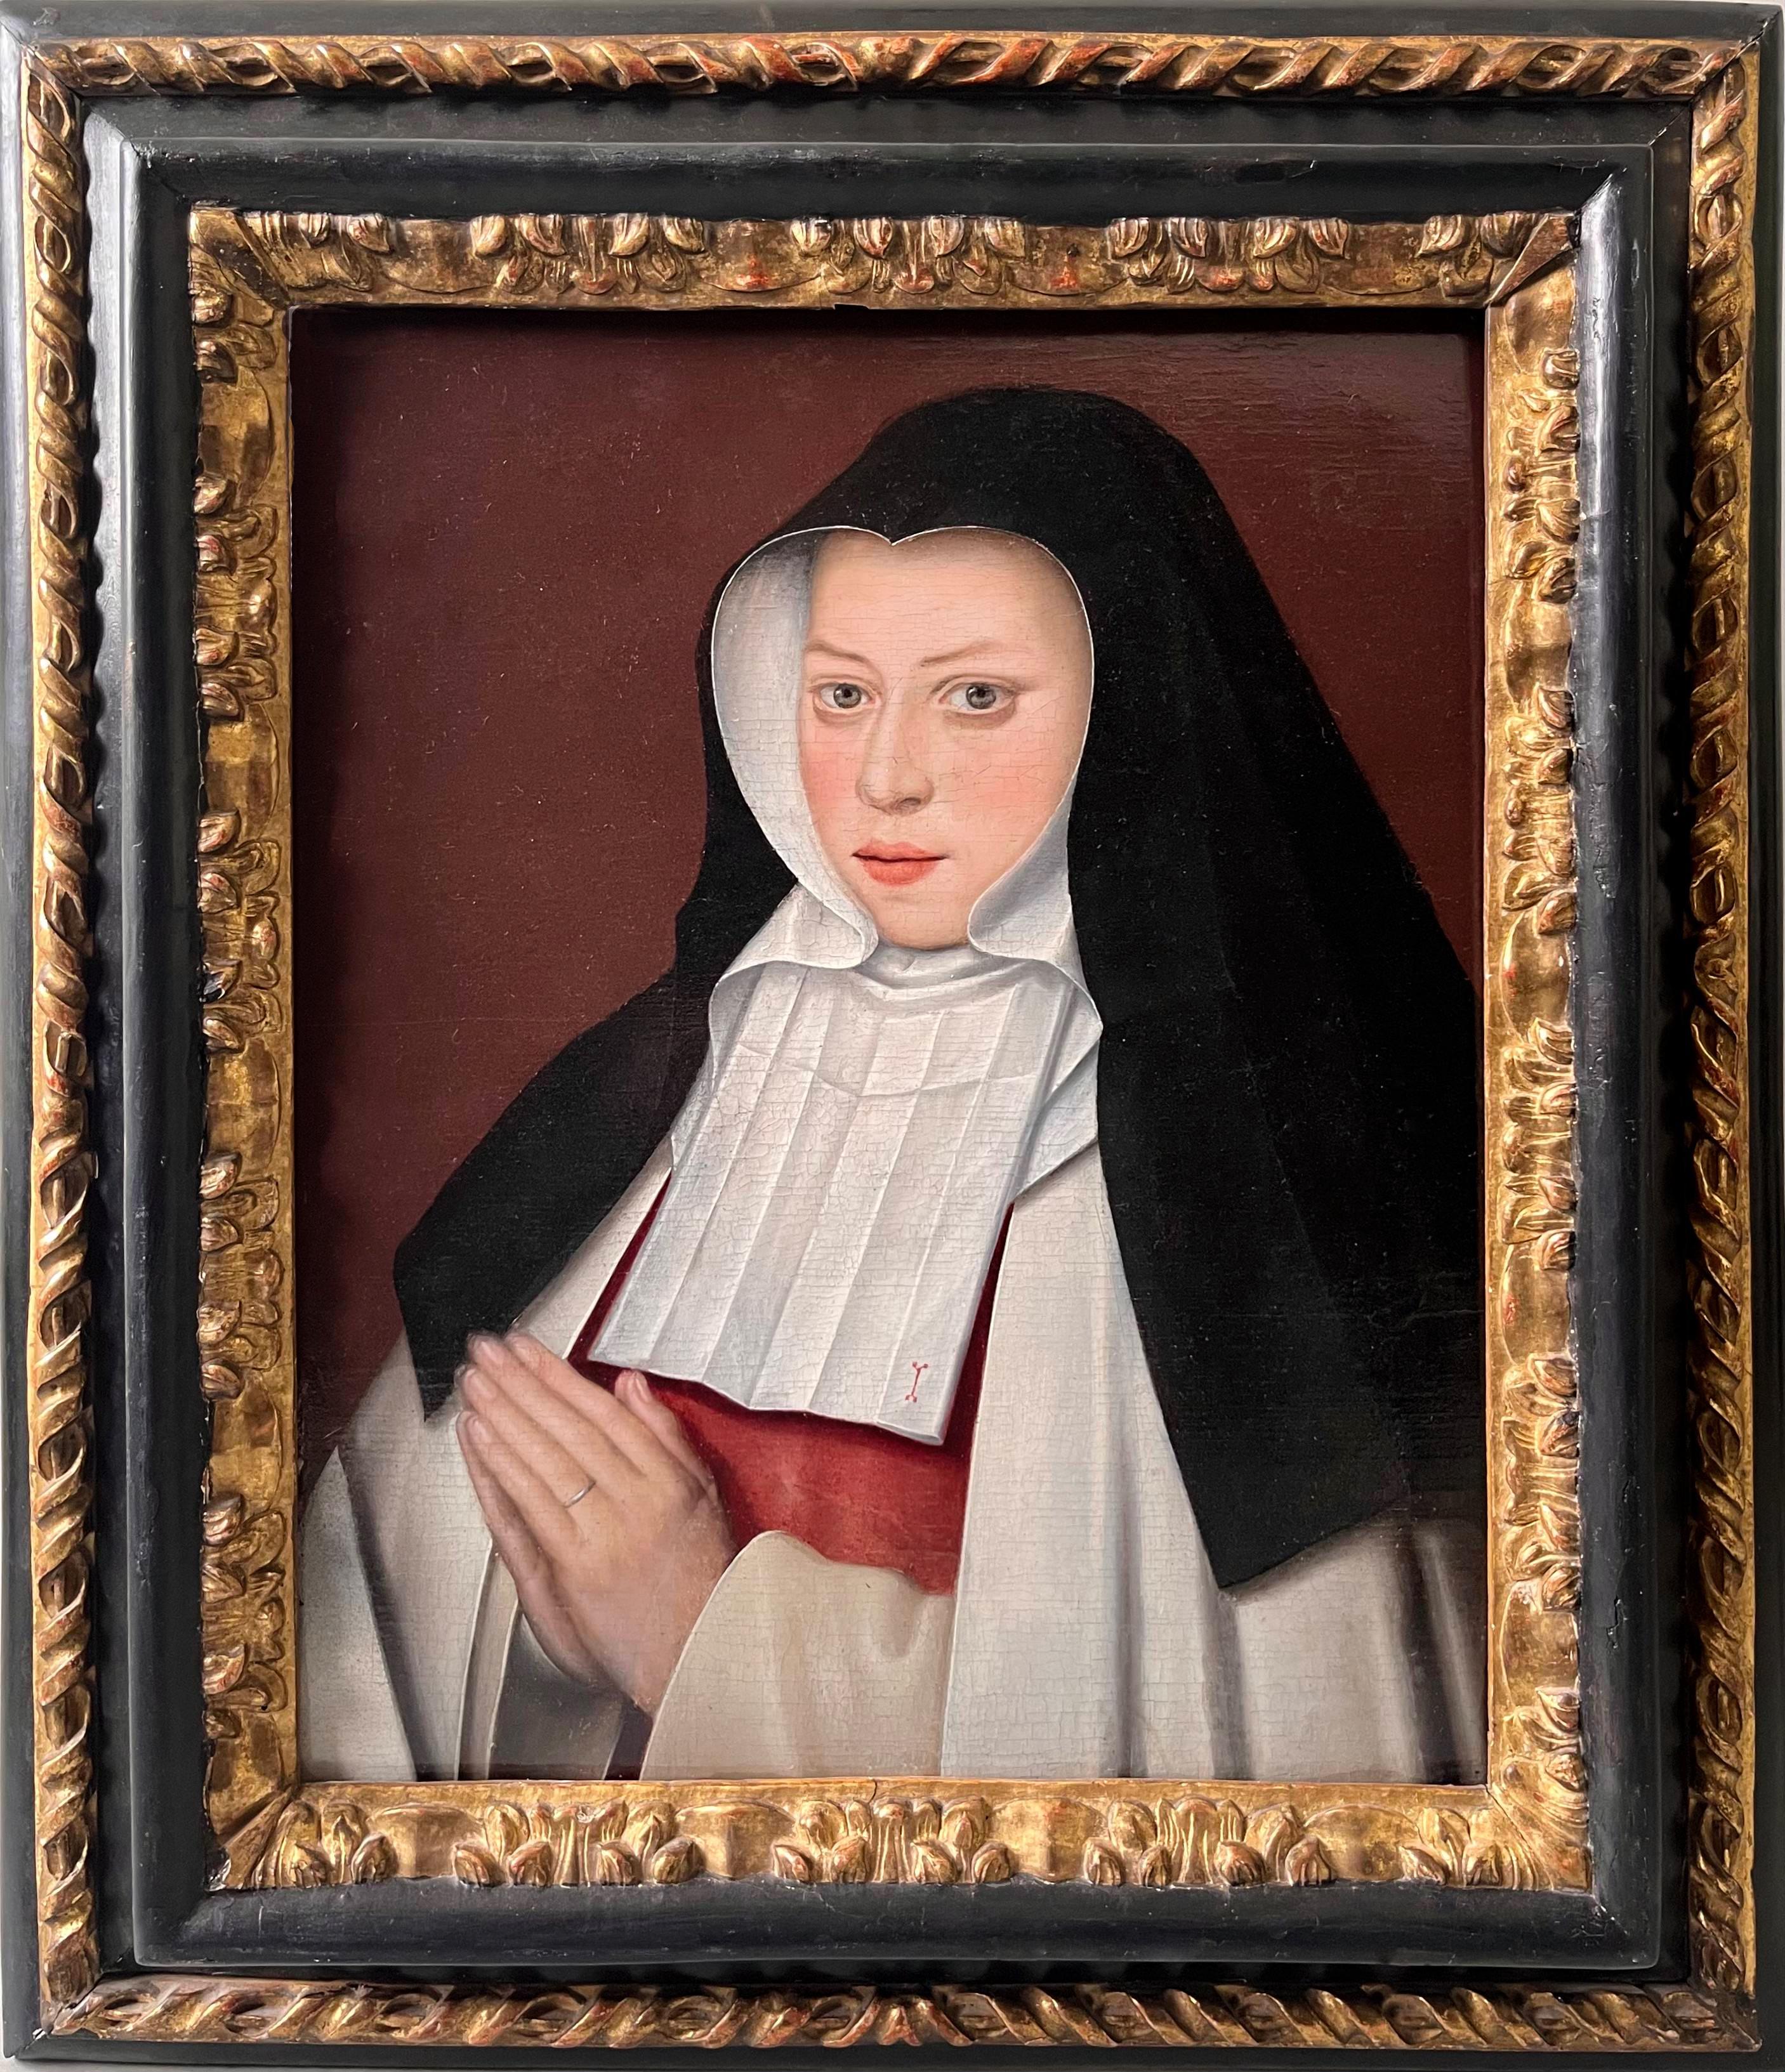 Unknown Portrait Painting - 16th century old master painting of a Nun - Queen Jeanne de France